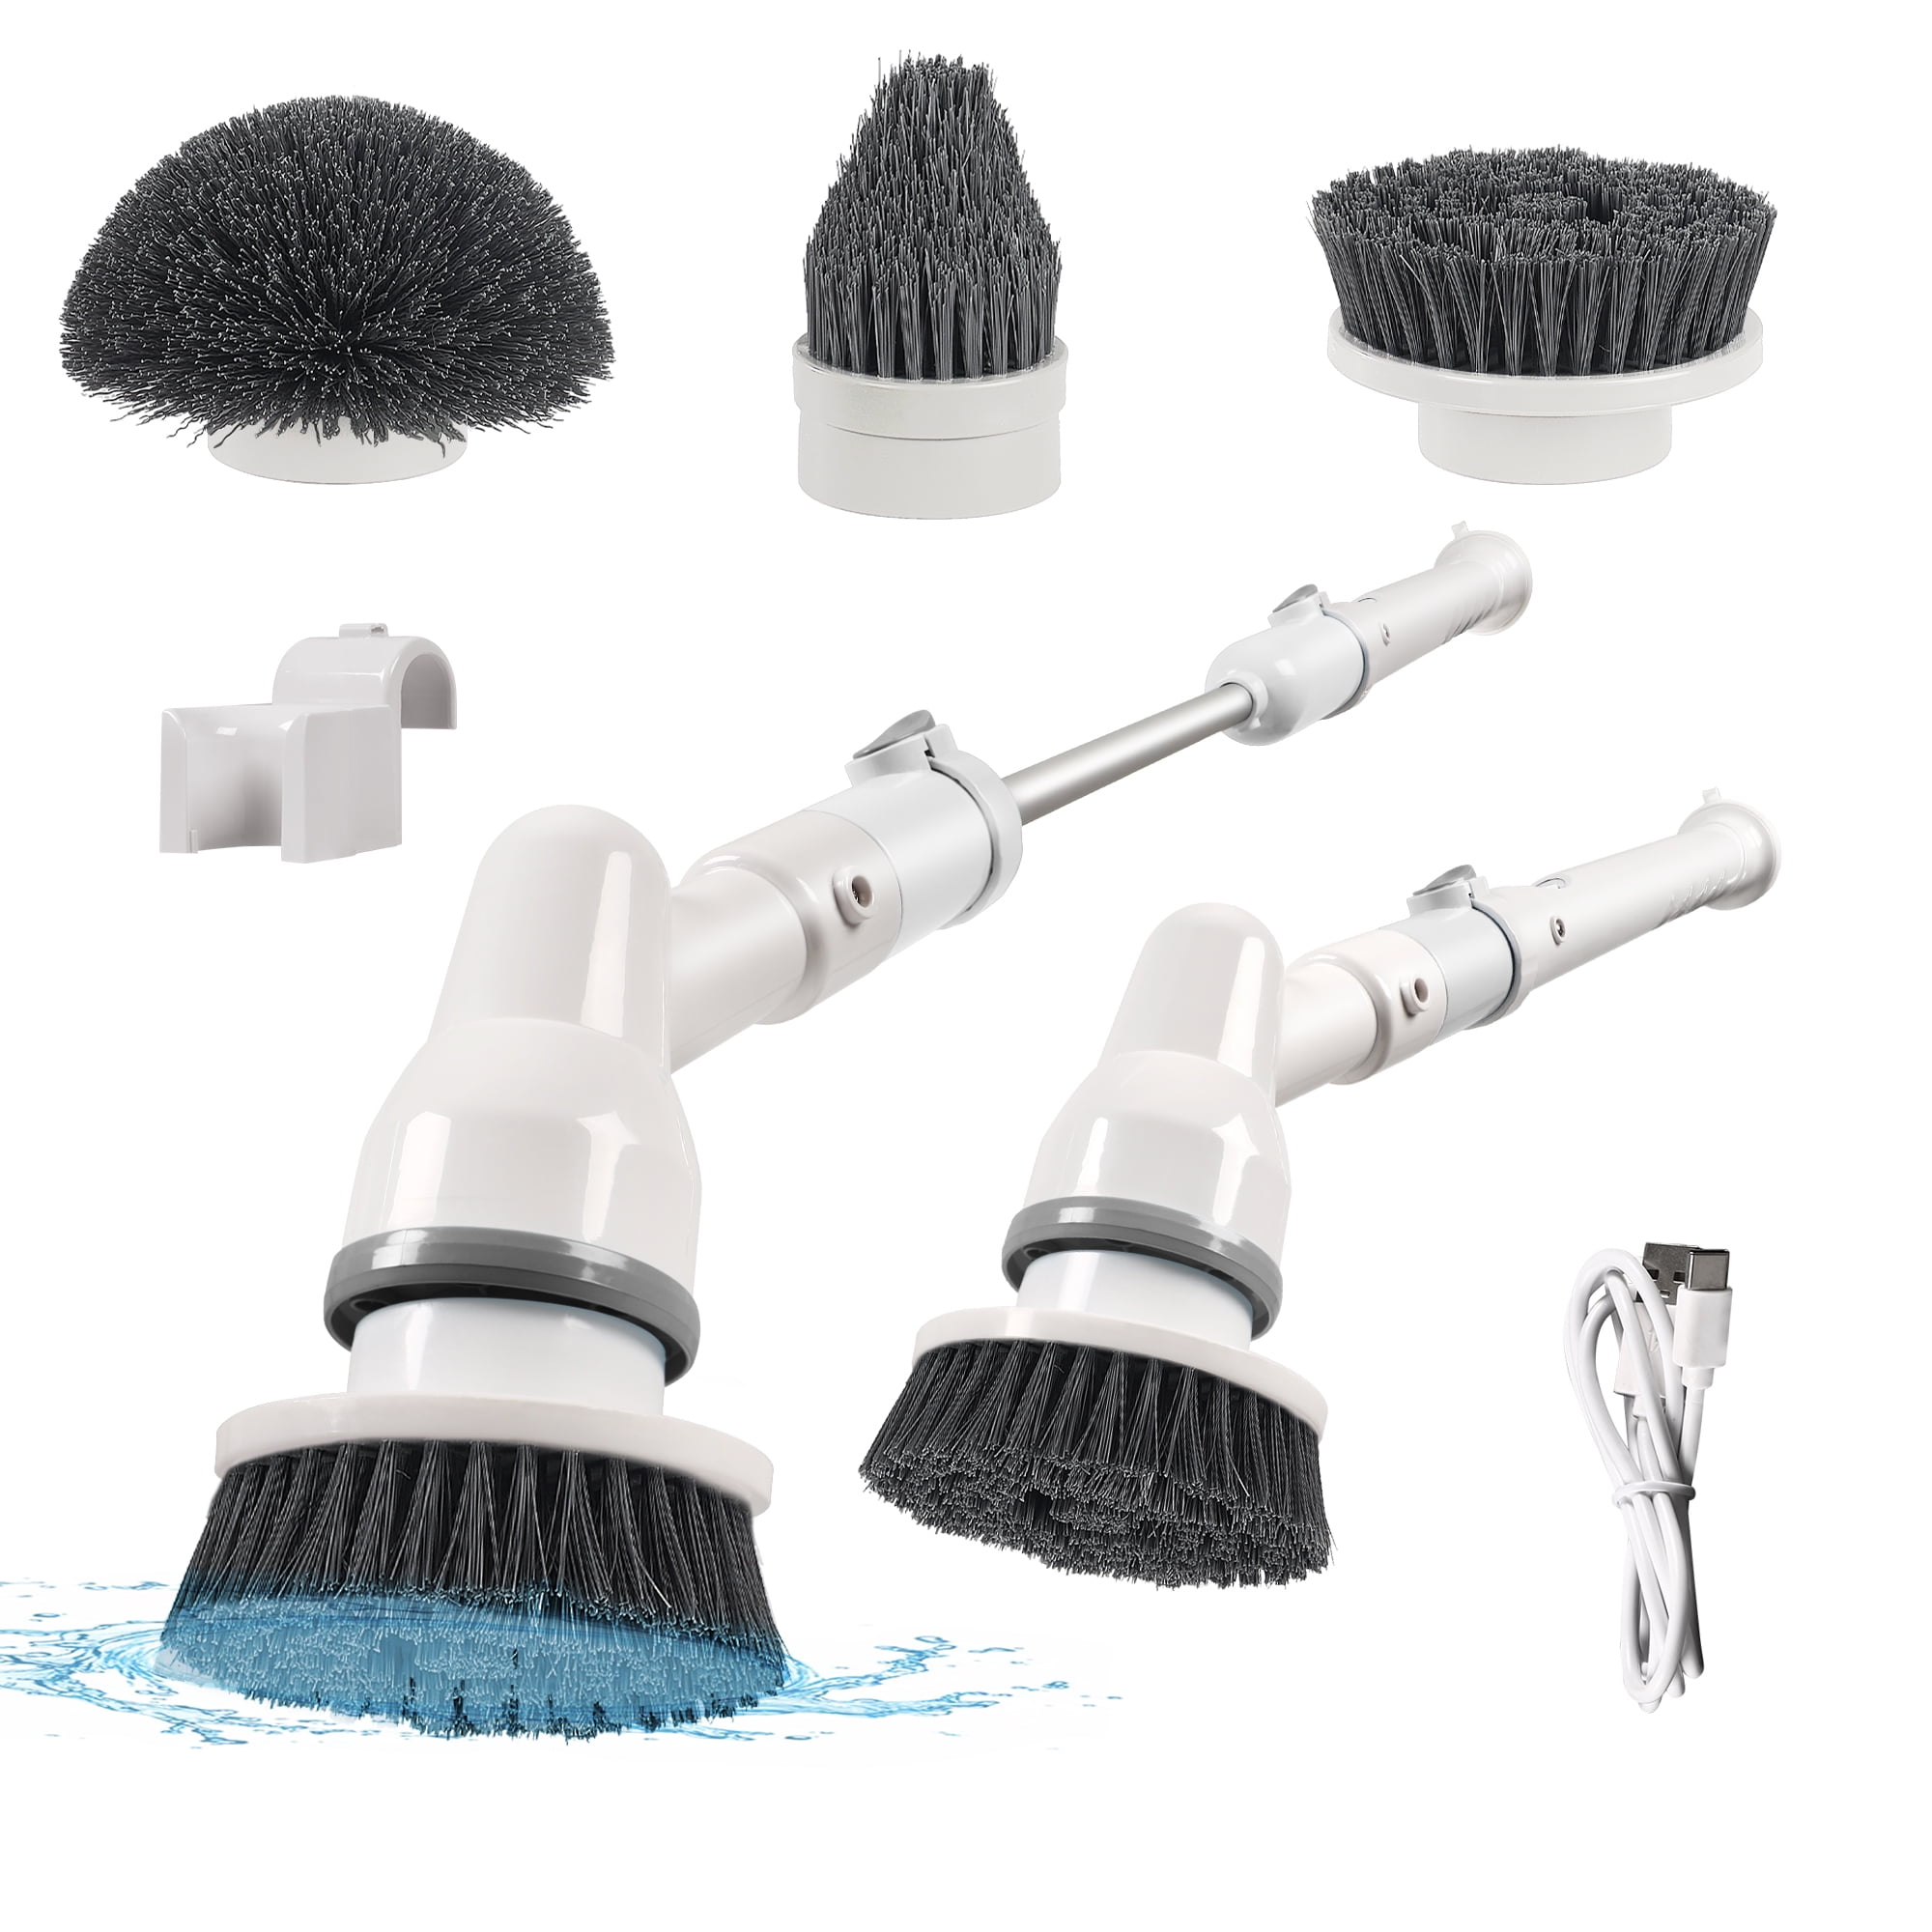 Electric Spin Scrubber, IPX7 Waterproof Cordless Cleaning Brush with 3  Brush Heads, Adjustable Extension Handle- HM708